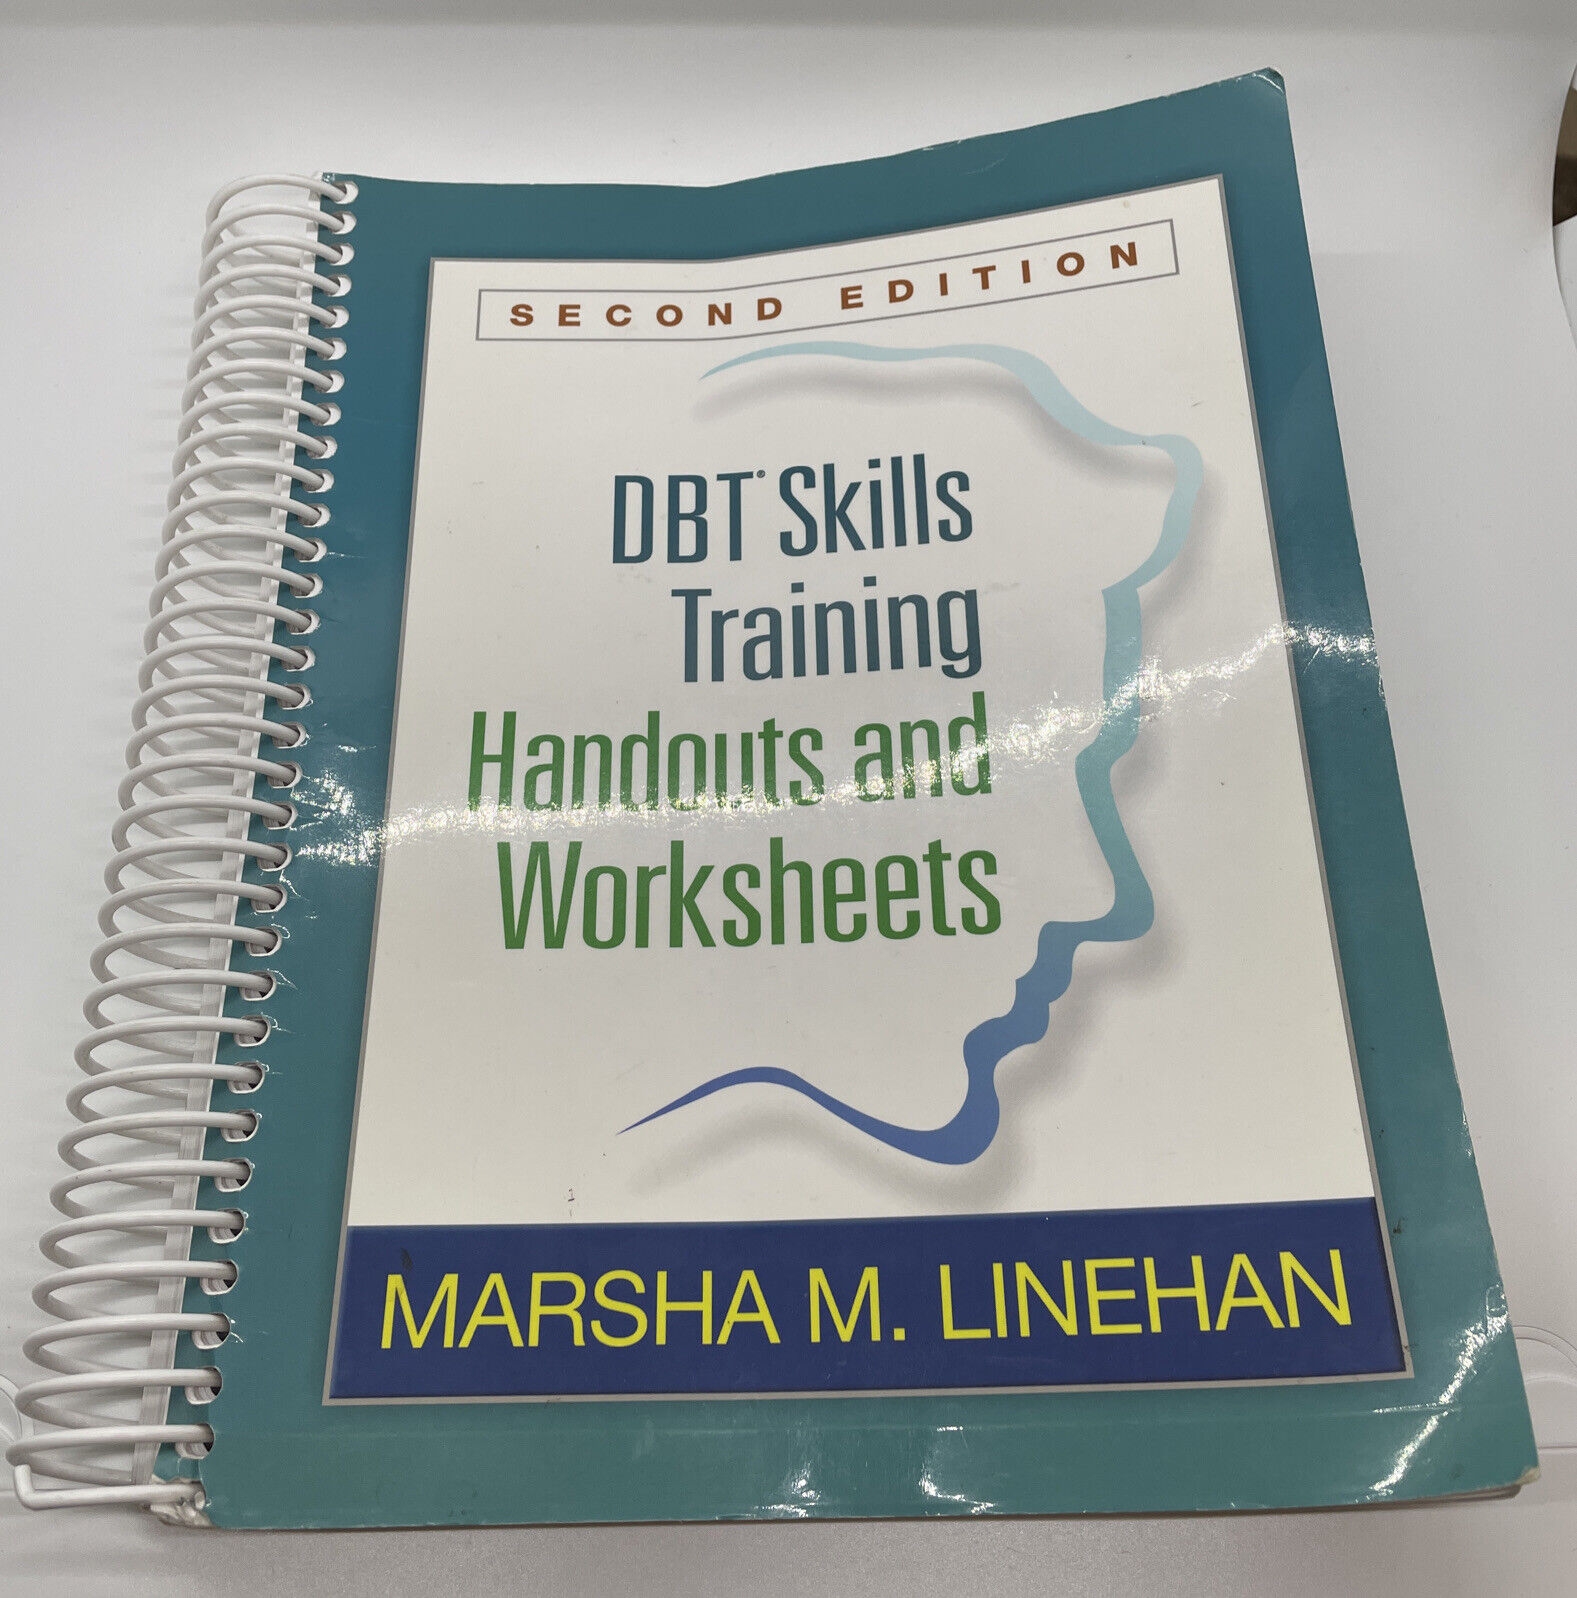 Dbt Skills And Training Handouts And Worksheets